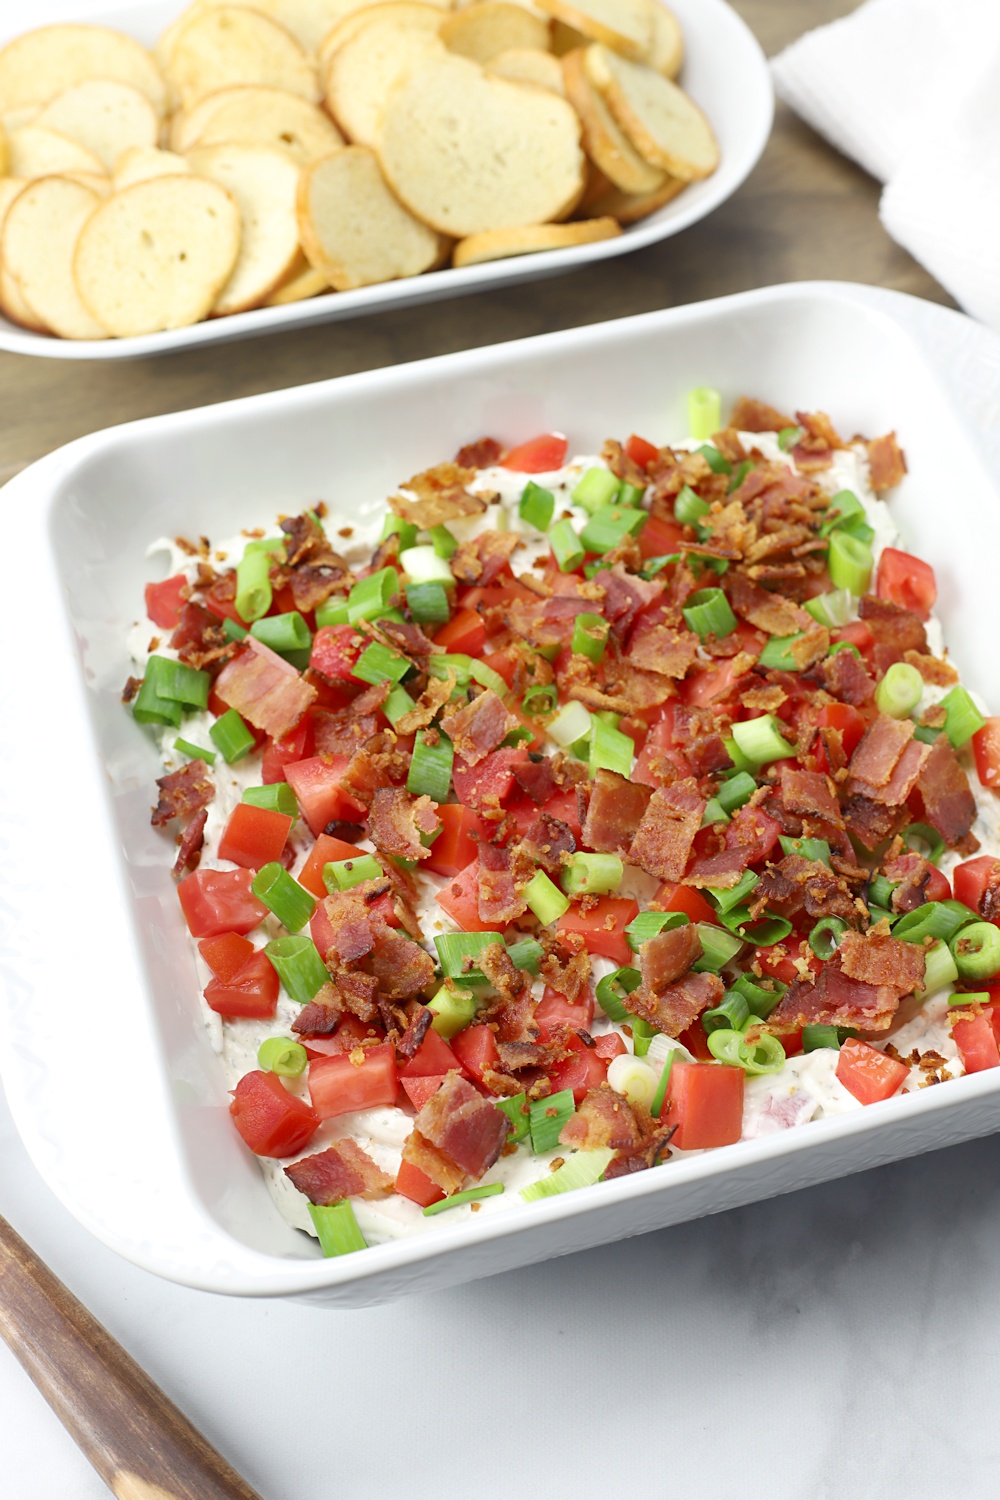 A plate of BLT Dip with bagel chips, ready to serve.